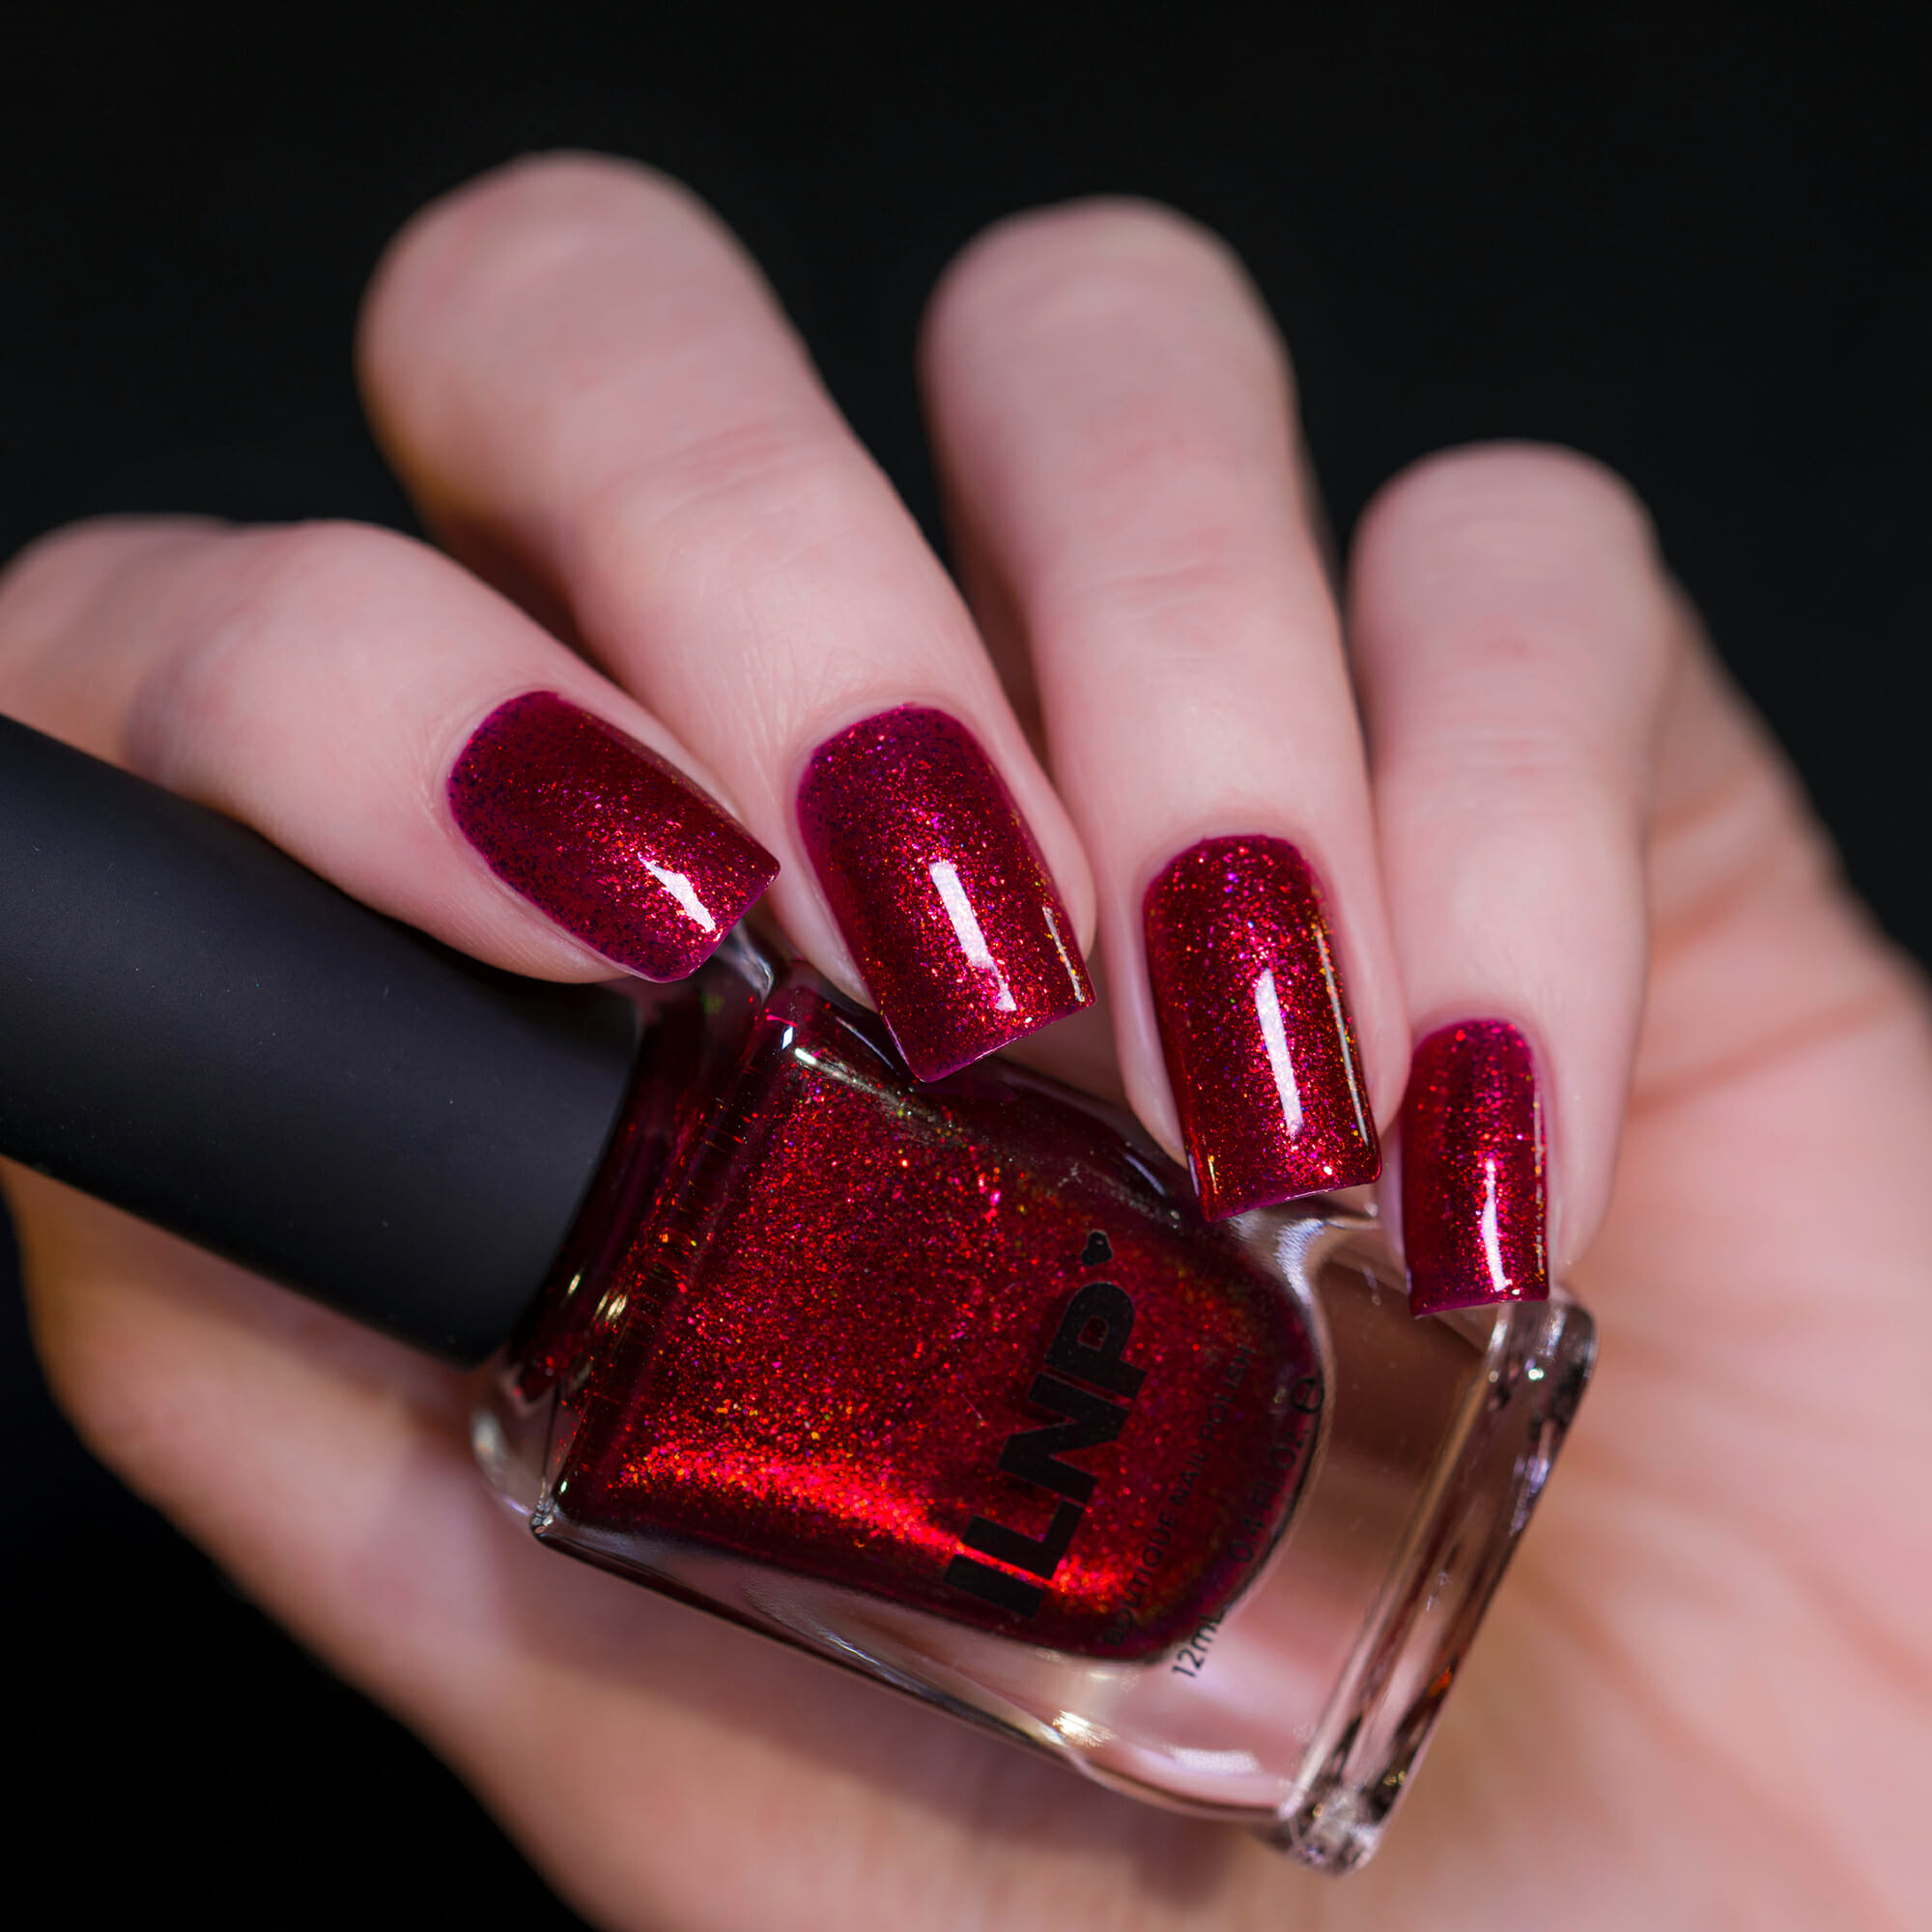 Nedsænkning facet umoral Ruby - Vibrant Red Shimmer Nail Polish by ILNP